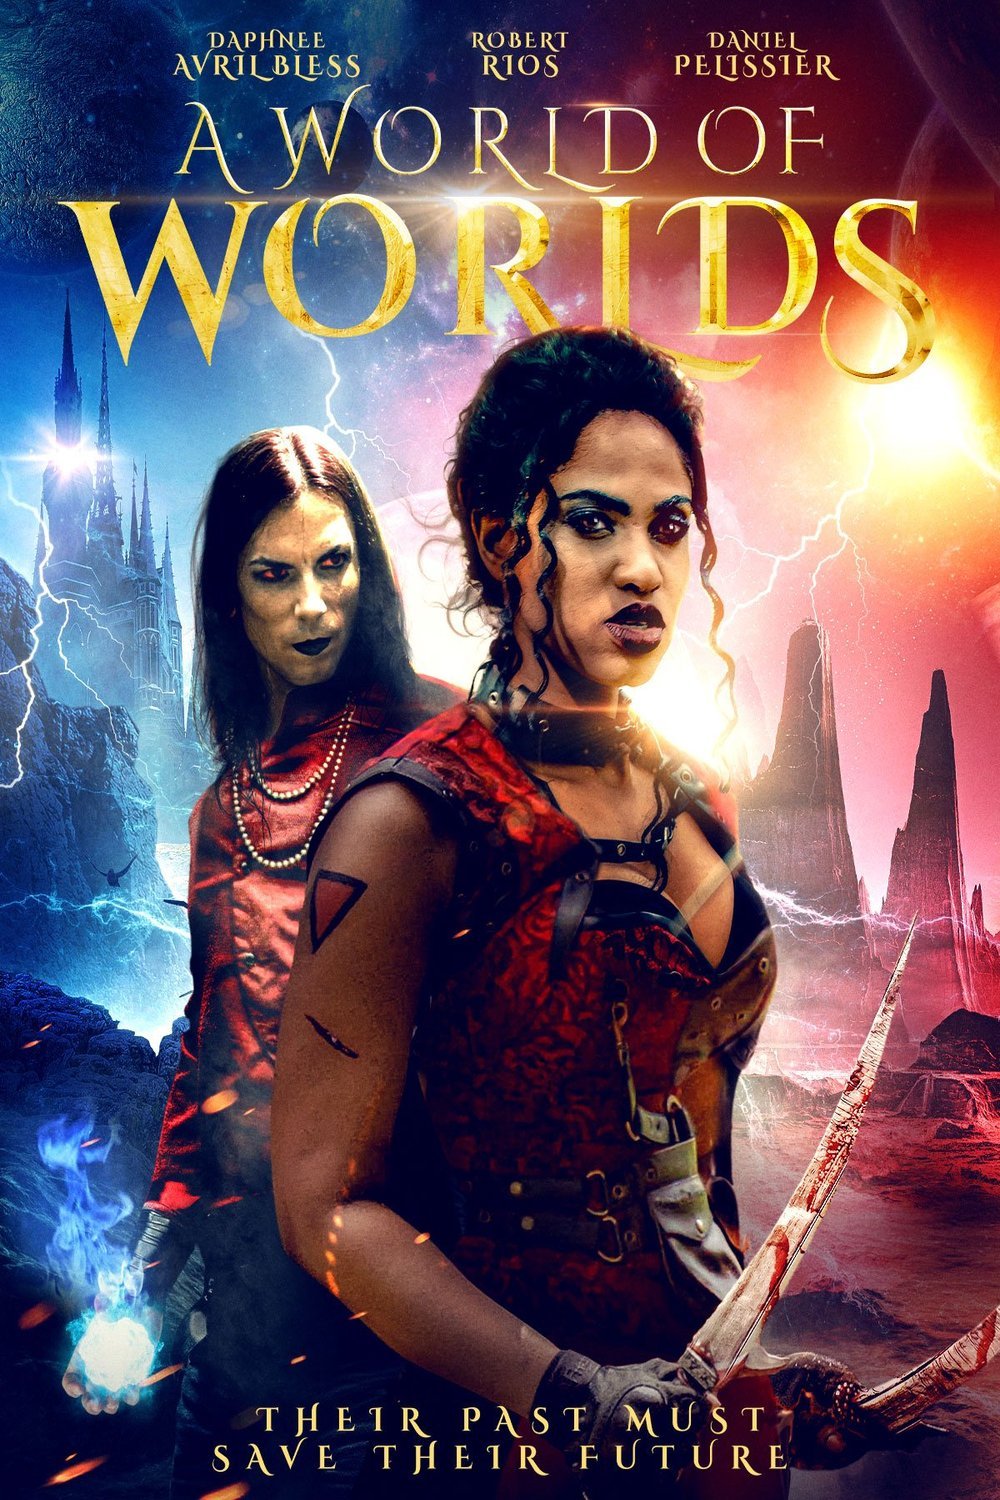 Poster of the movie A World of Worlds